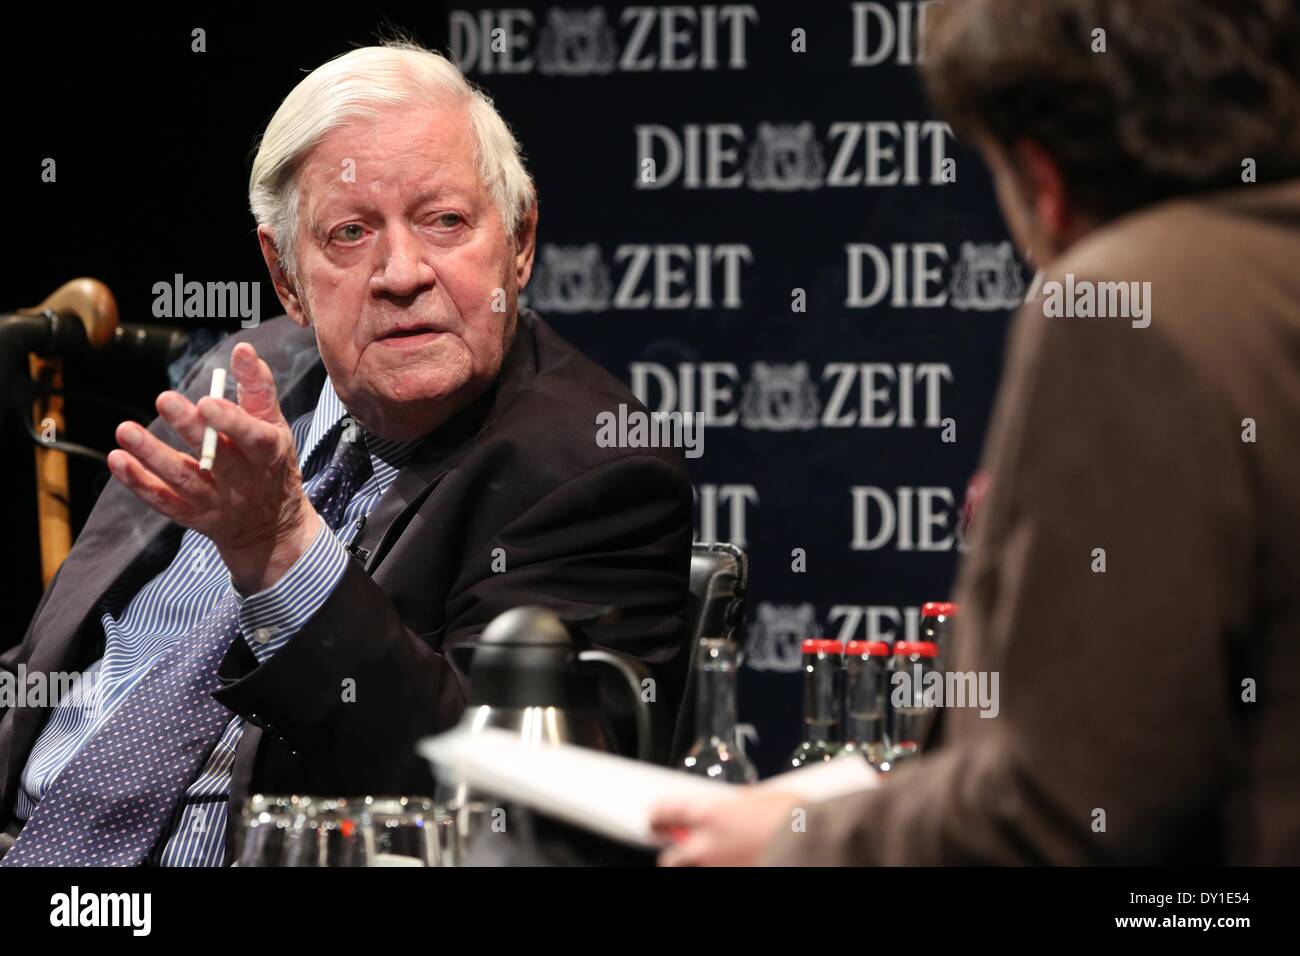 Hamburg, Germany. 02nd Apr, 2014. Former German Chancellor and co-publisher of newspaper 'Die Zeit' Helmut Schmidt (L, SPD) and editor-in-chief of 'Die Zeit' Giovanni di Lorenzo sit on the podium during the series of events 'The long night of Die Zeit' at Schauspielhaus in Hamburg, Germany, 02 April 2014. The former German Chancellor answered collected readers' questions on Hamburg. 'Die Zeit' will for the first time be published with a local section for Hamburg on 03 April 2014. Photo: BODO MARKS/DPA/Alamy Live News Stock Photo